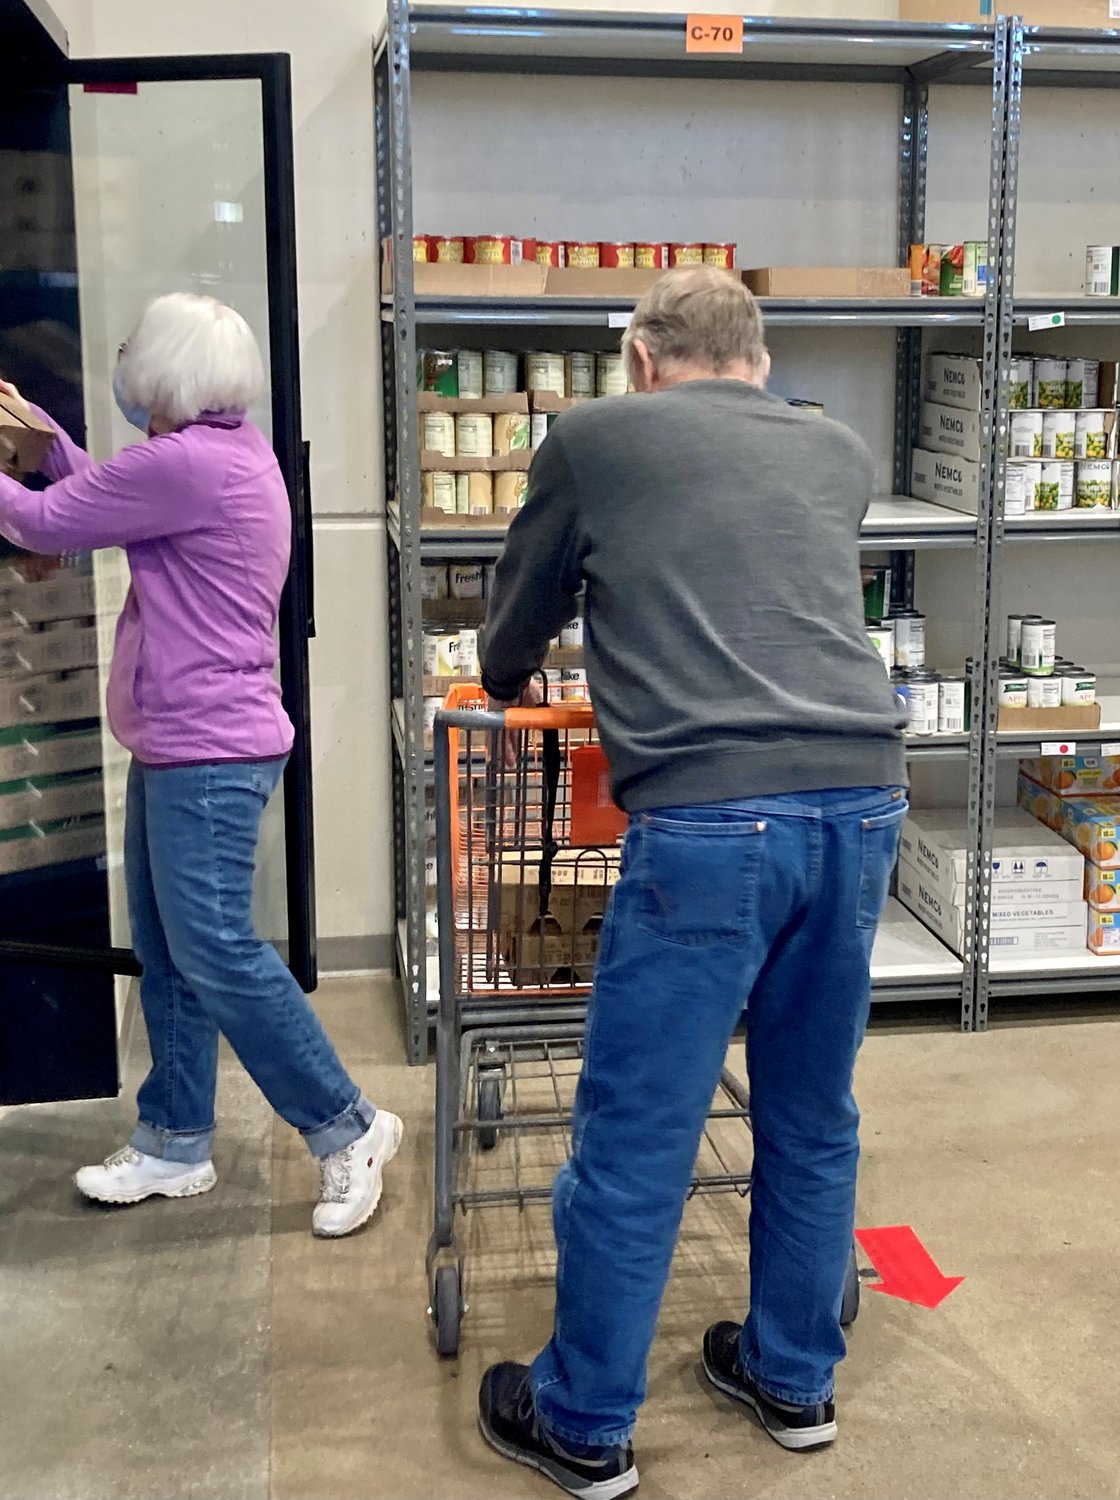 Members of the Joyful Servants Fraternity of the Secular Franciscan Order visit and assist in the food pantry at the Catholic Charities Center in Jefferson City in January 2023.